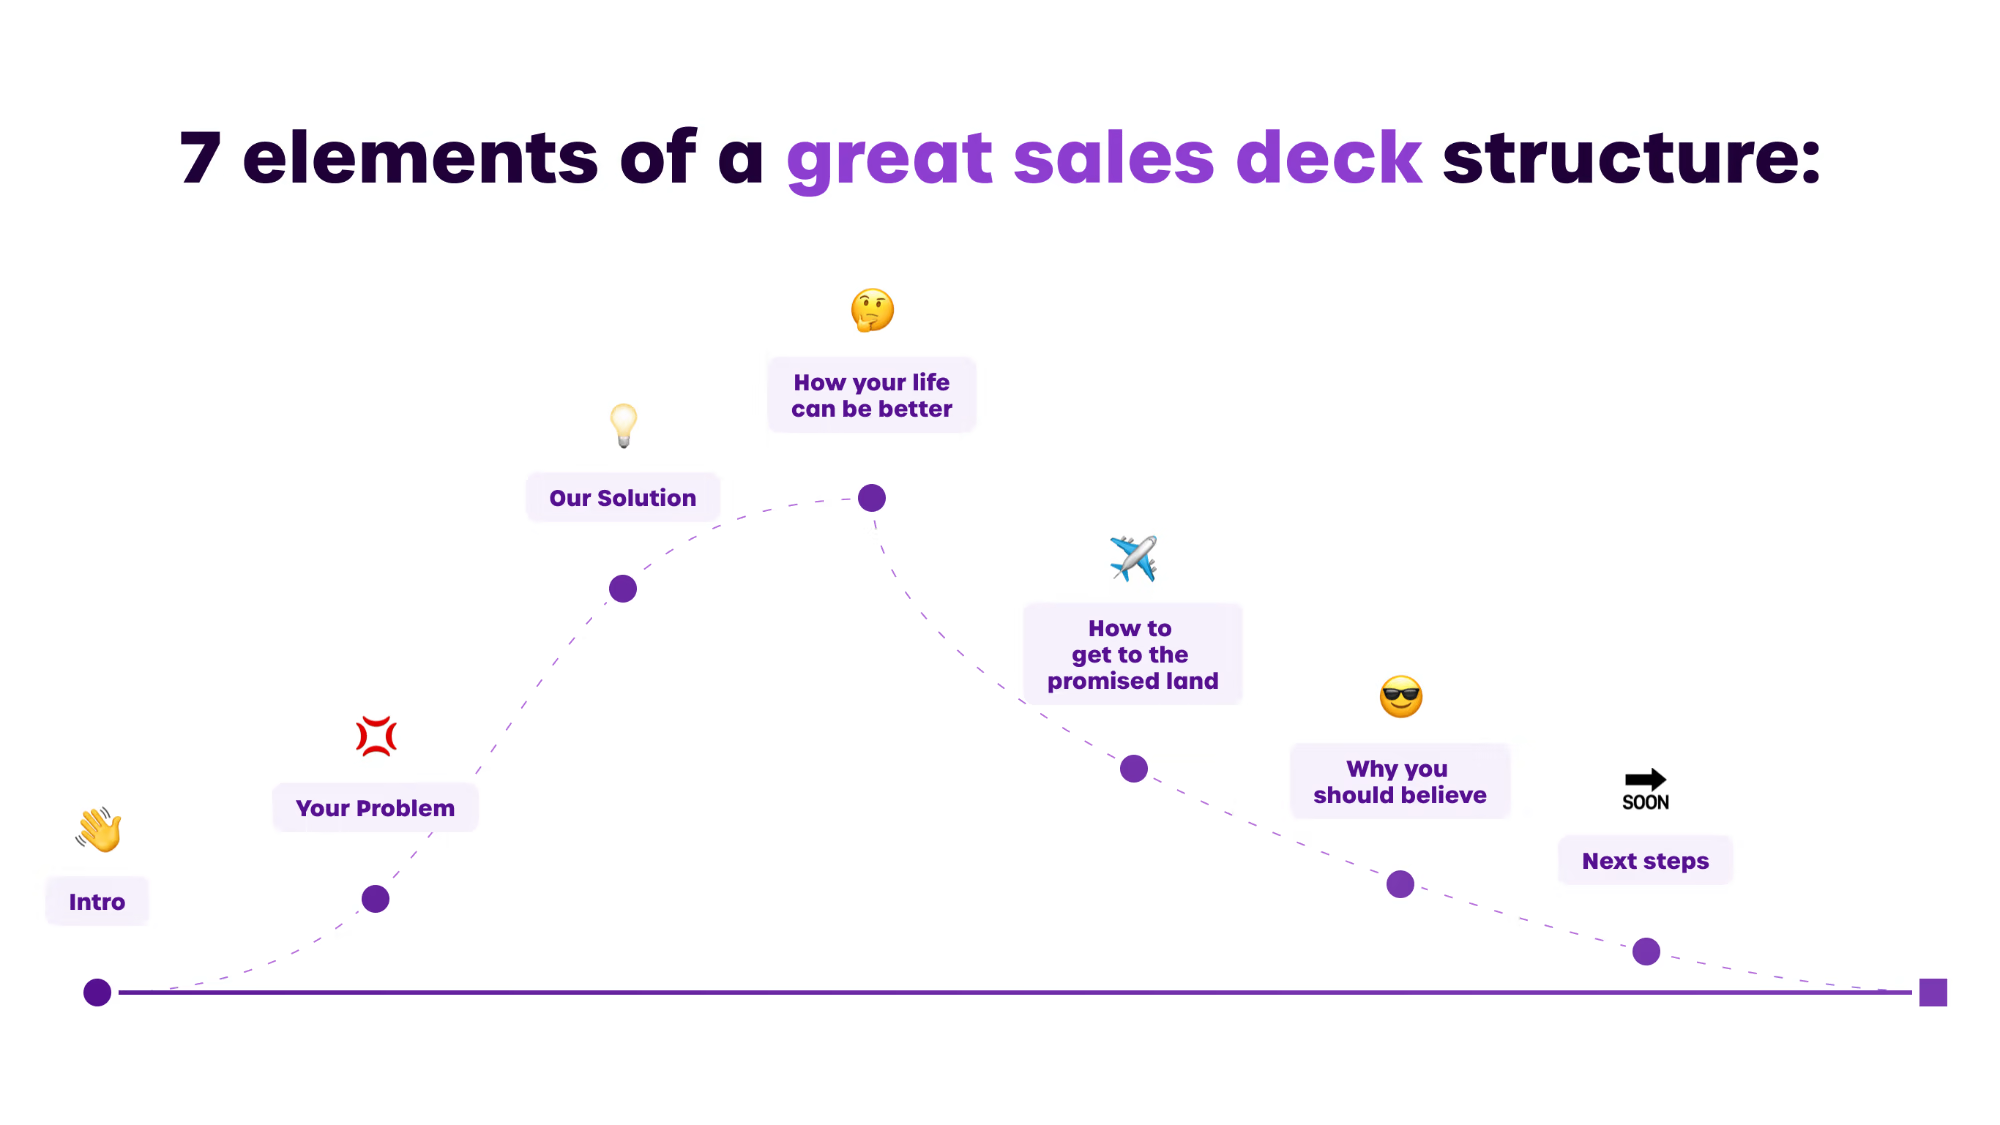 Elements of a great sales deck structure